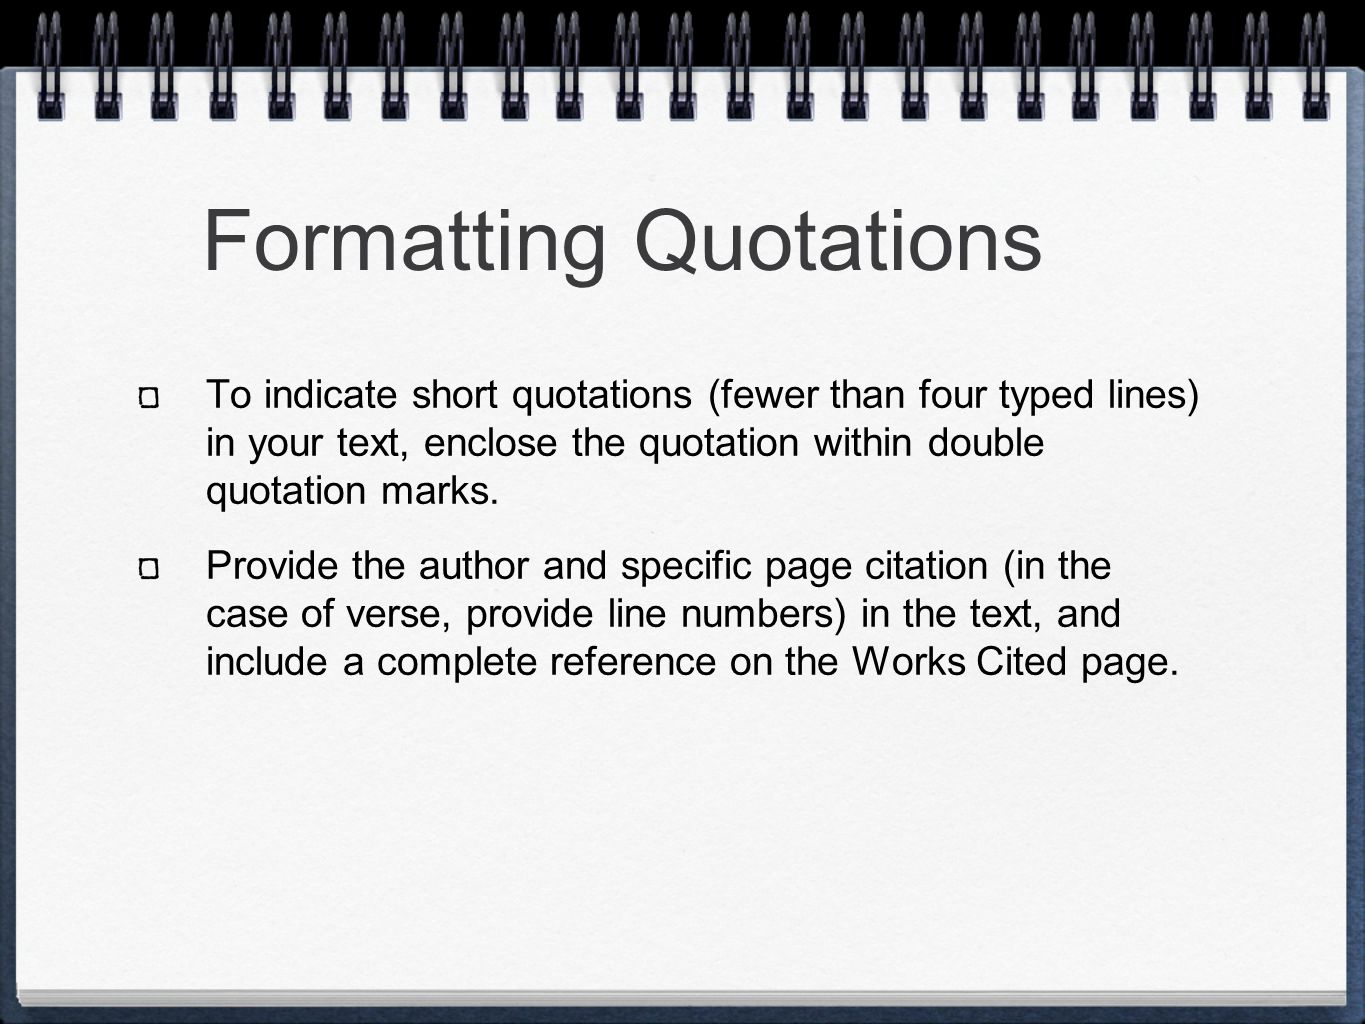 Formatting Quotations To indicate short quotations (fewer than four typed lines) in your text, enclose the quotation within double quotation marks.